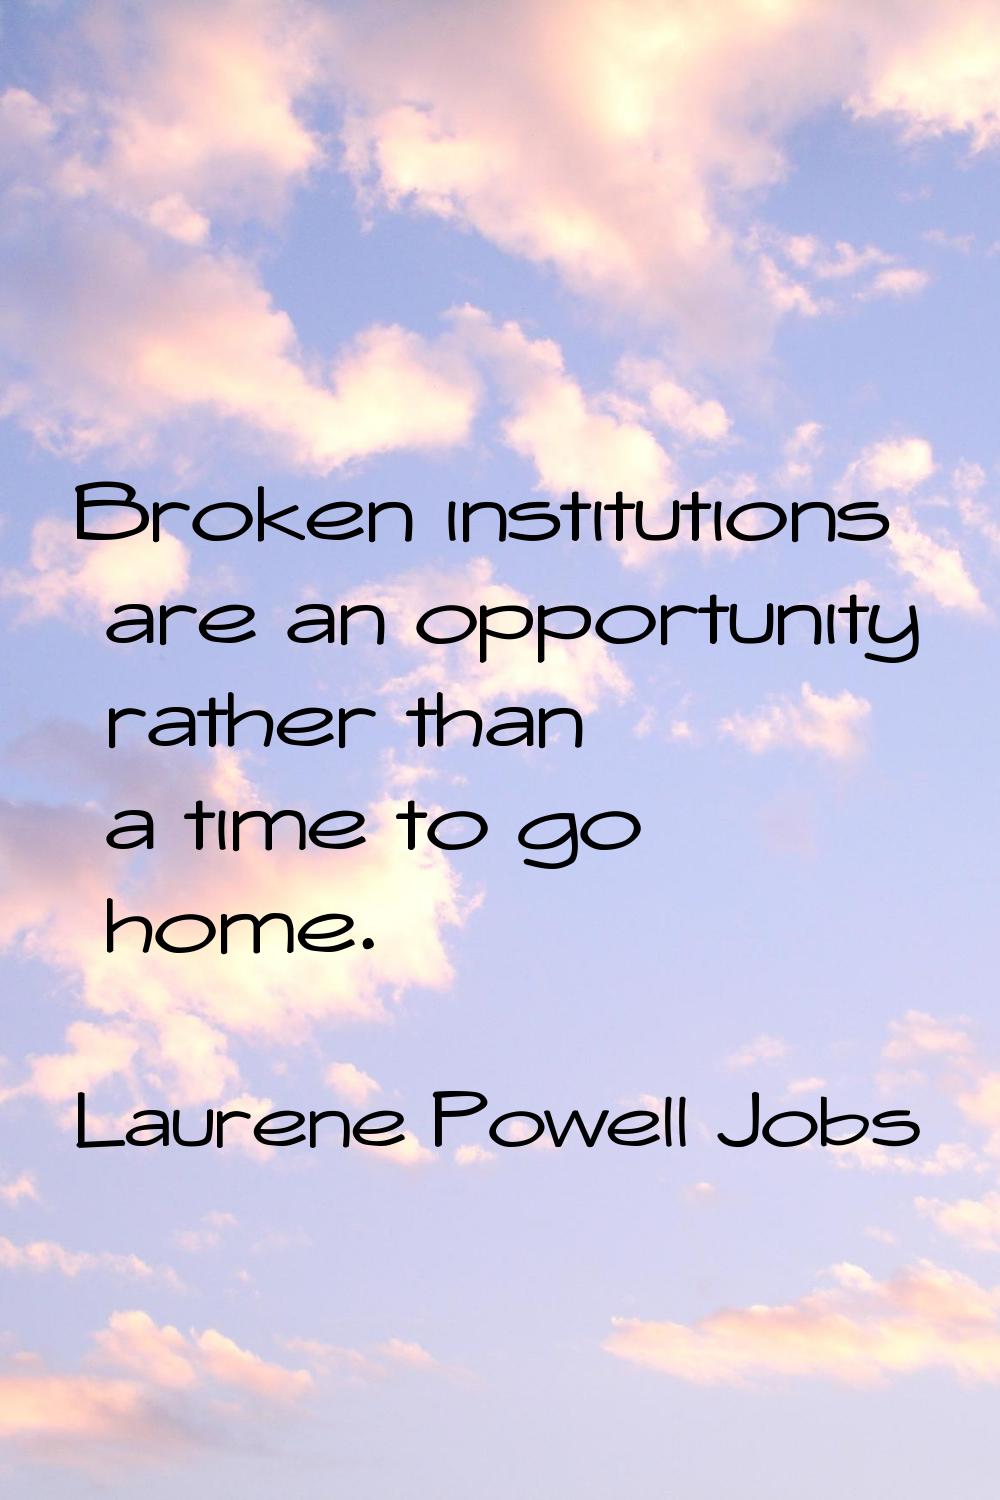 Broken institutions are an opportunity rather than a time to go home.